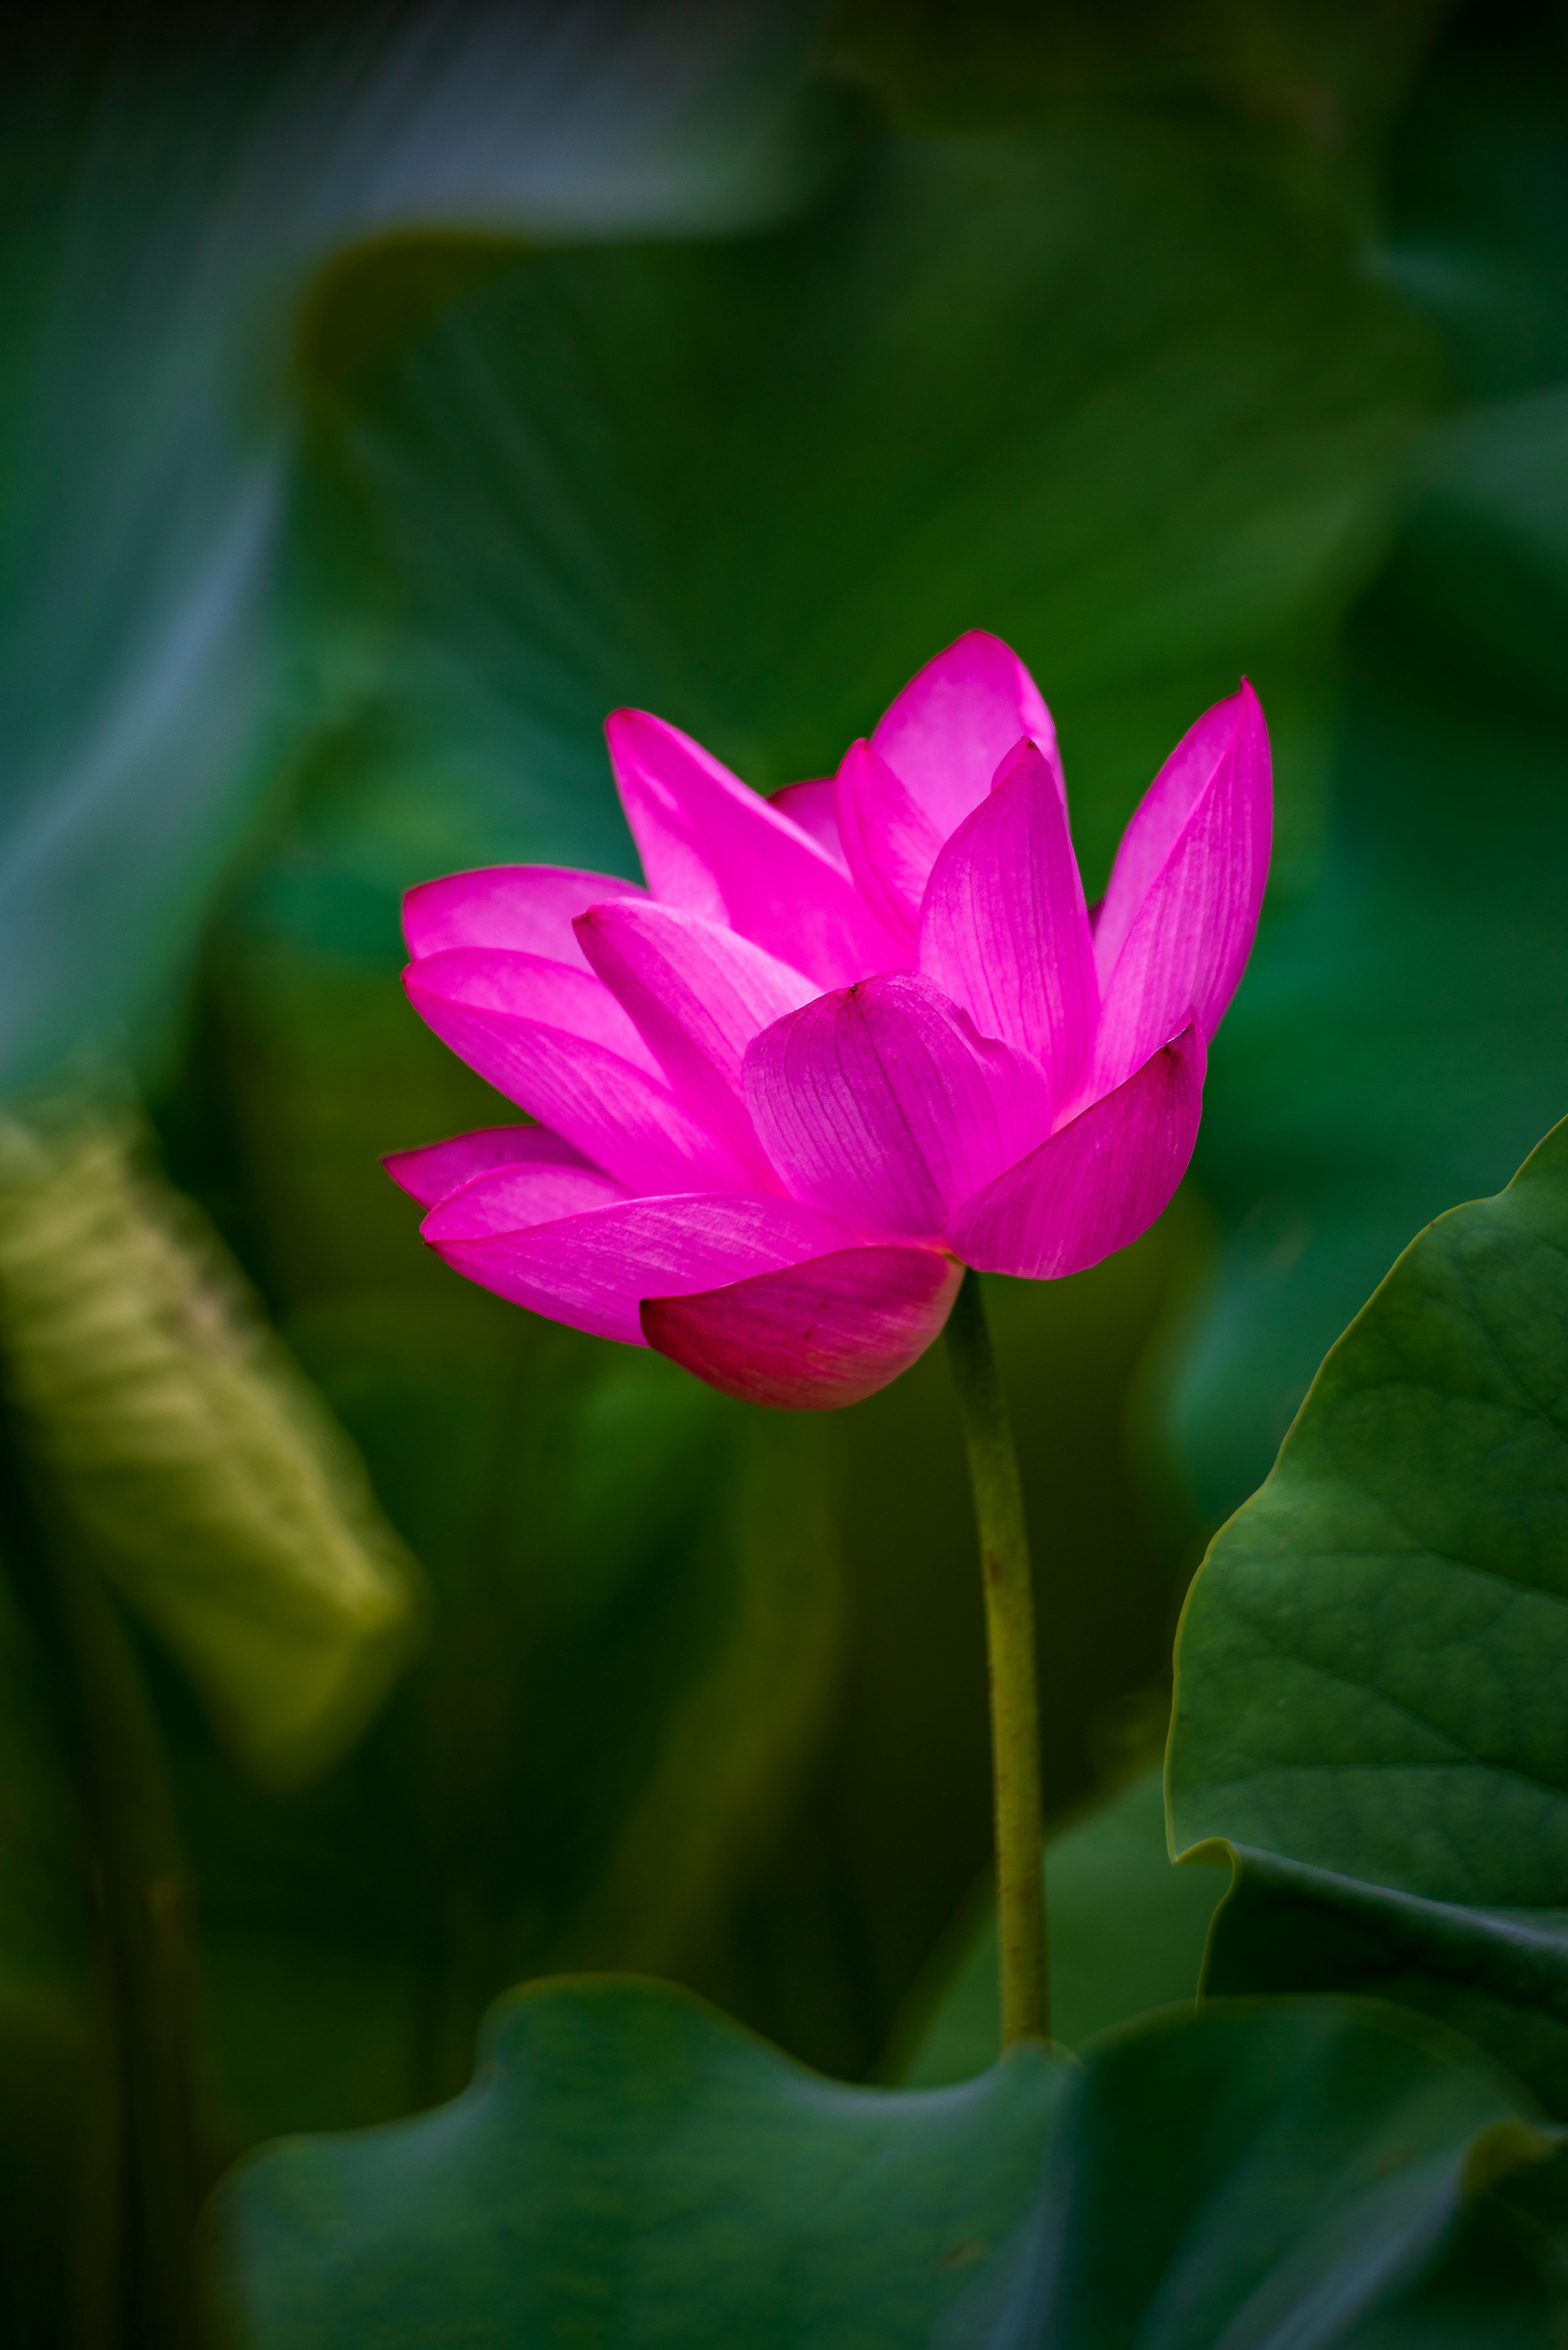 Pink Indian Lotus Flowers with Green Leaves · Free Stock Photo